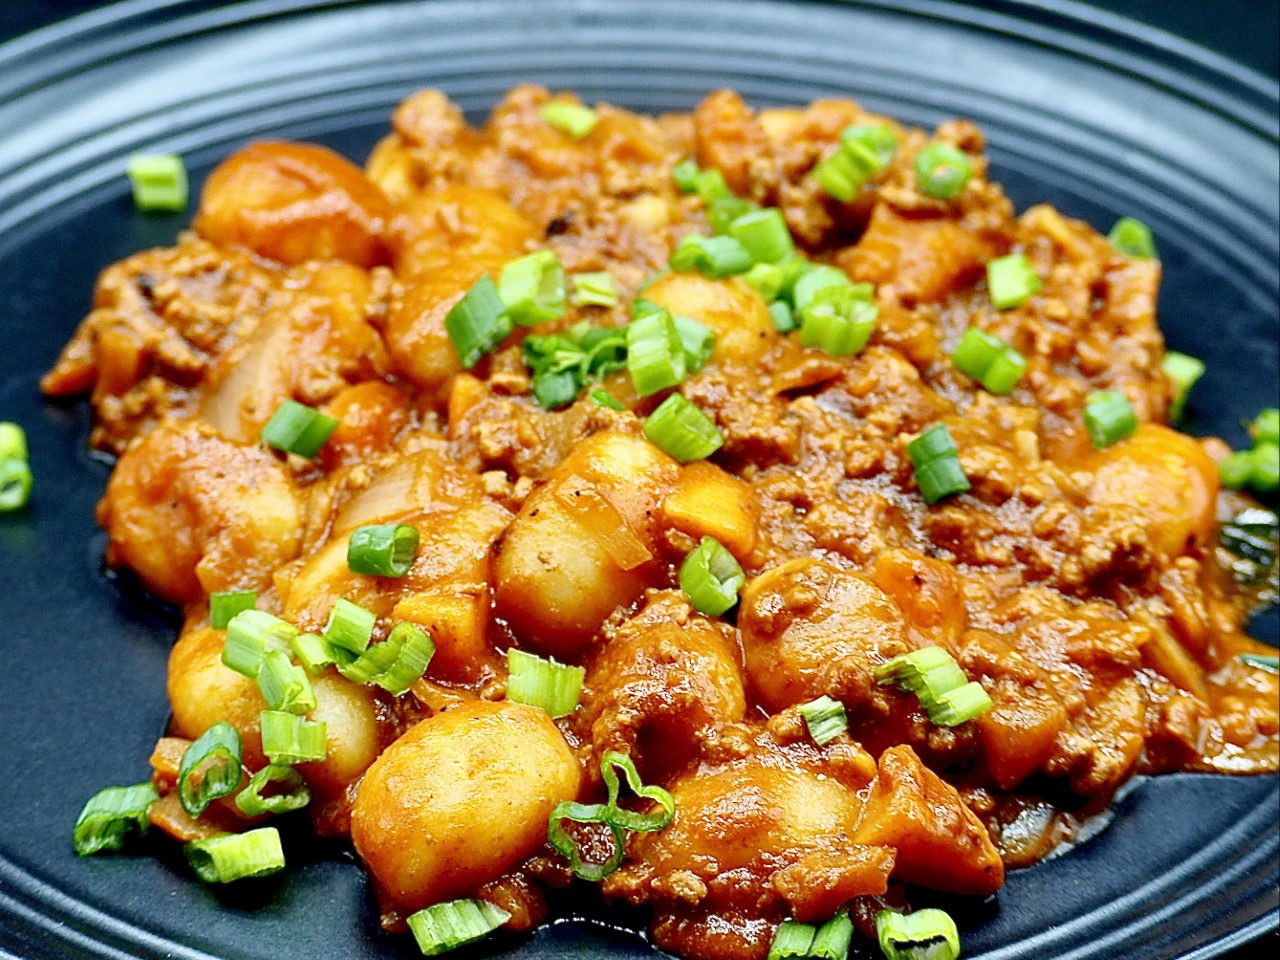 Moroccan Gnocchi with Harrissa, Ground Beef and Sweet Potato